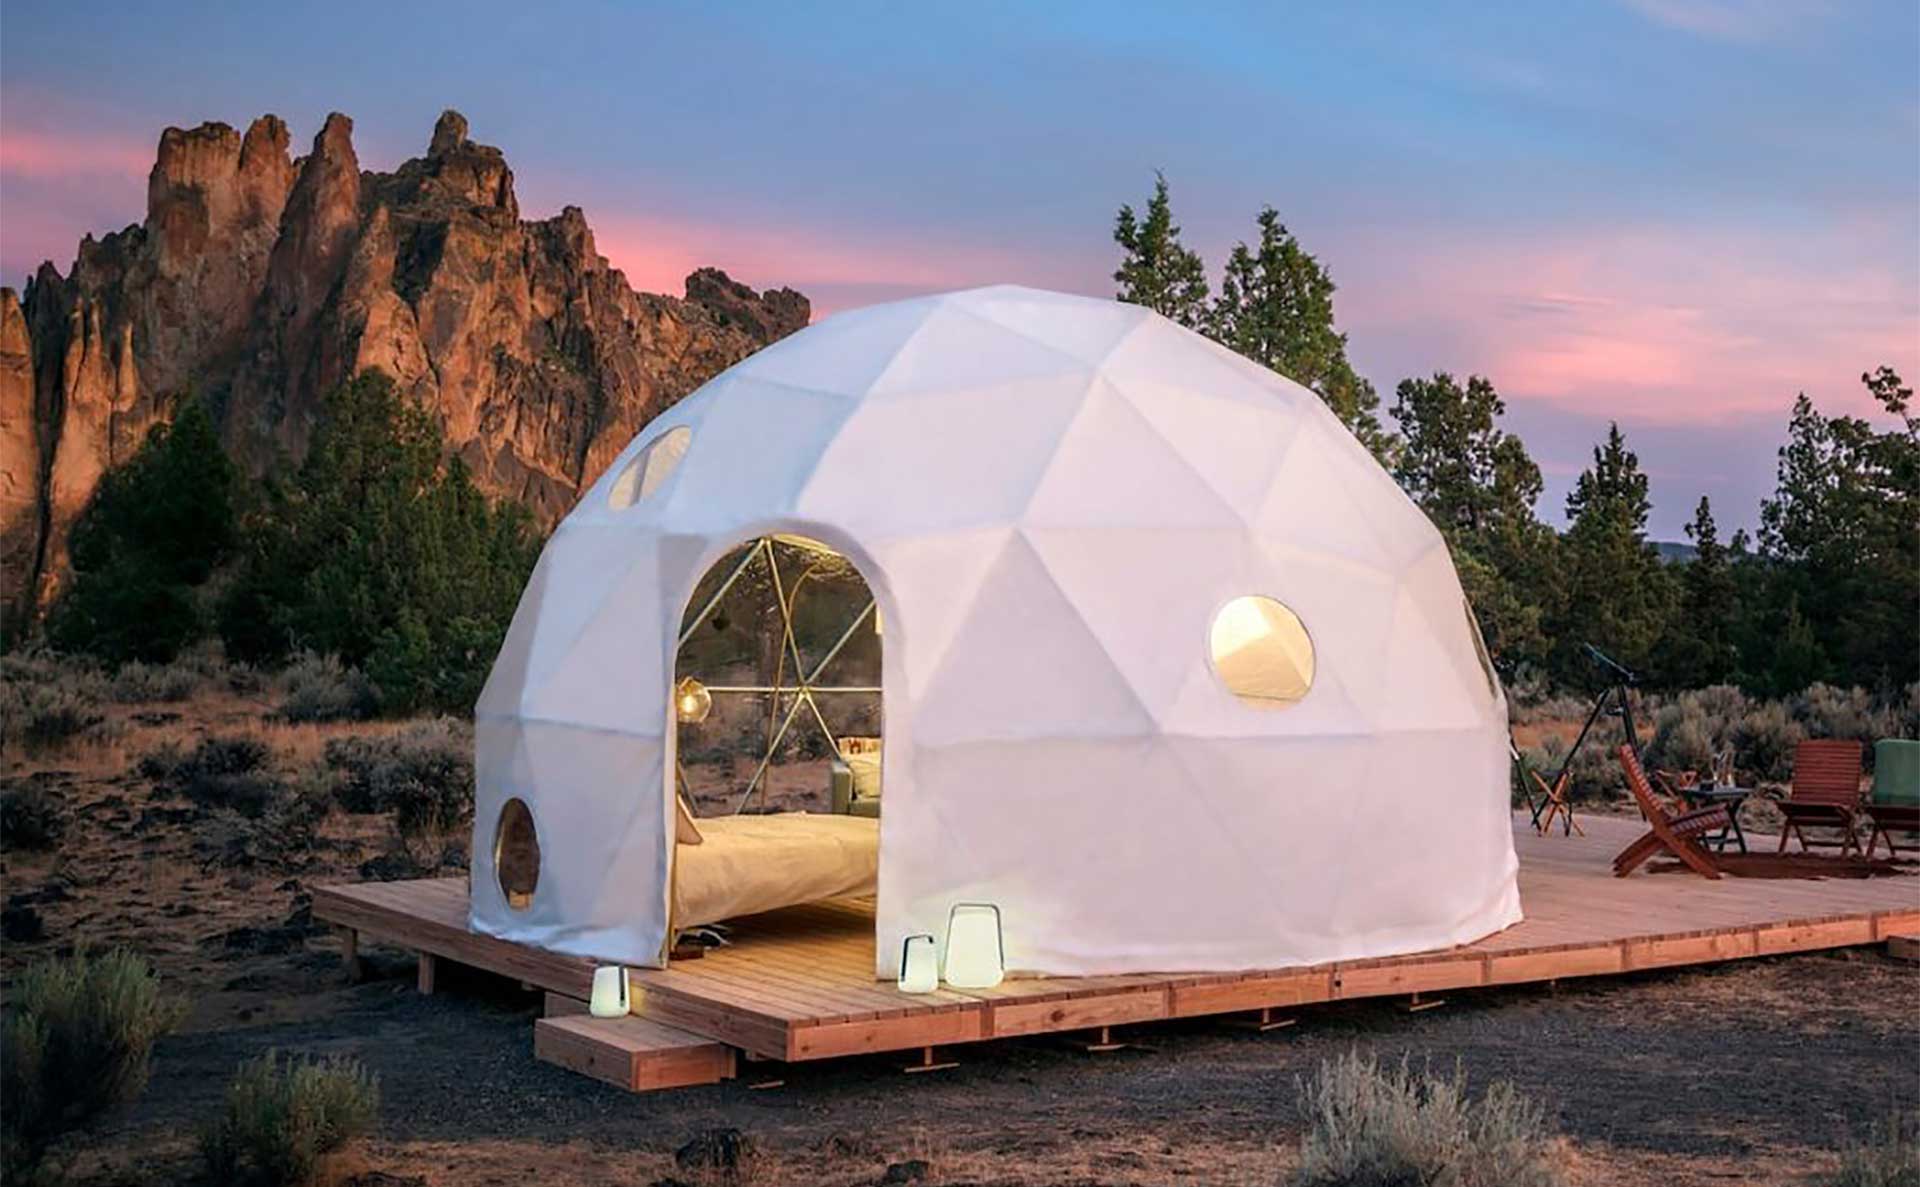 What Is Glamping and Why Is It So Popular?